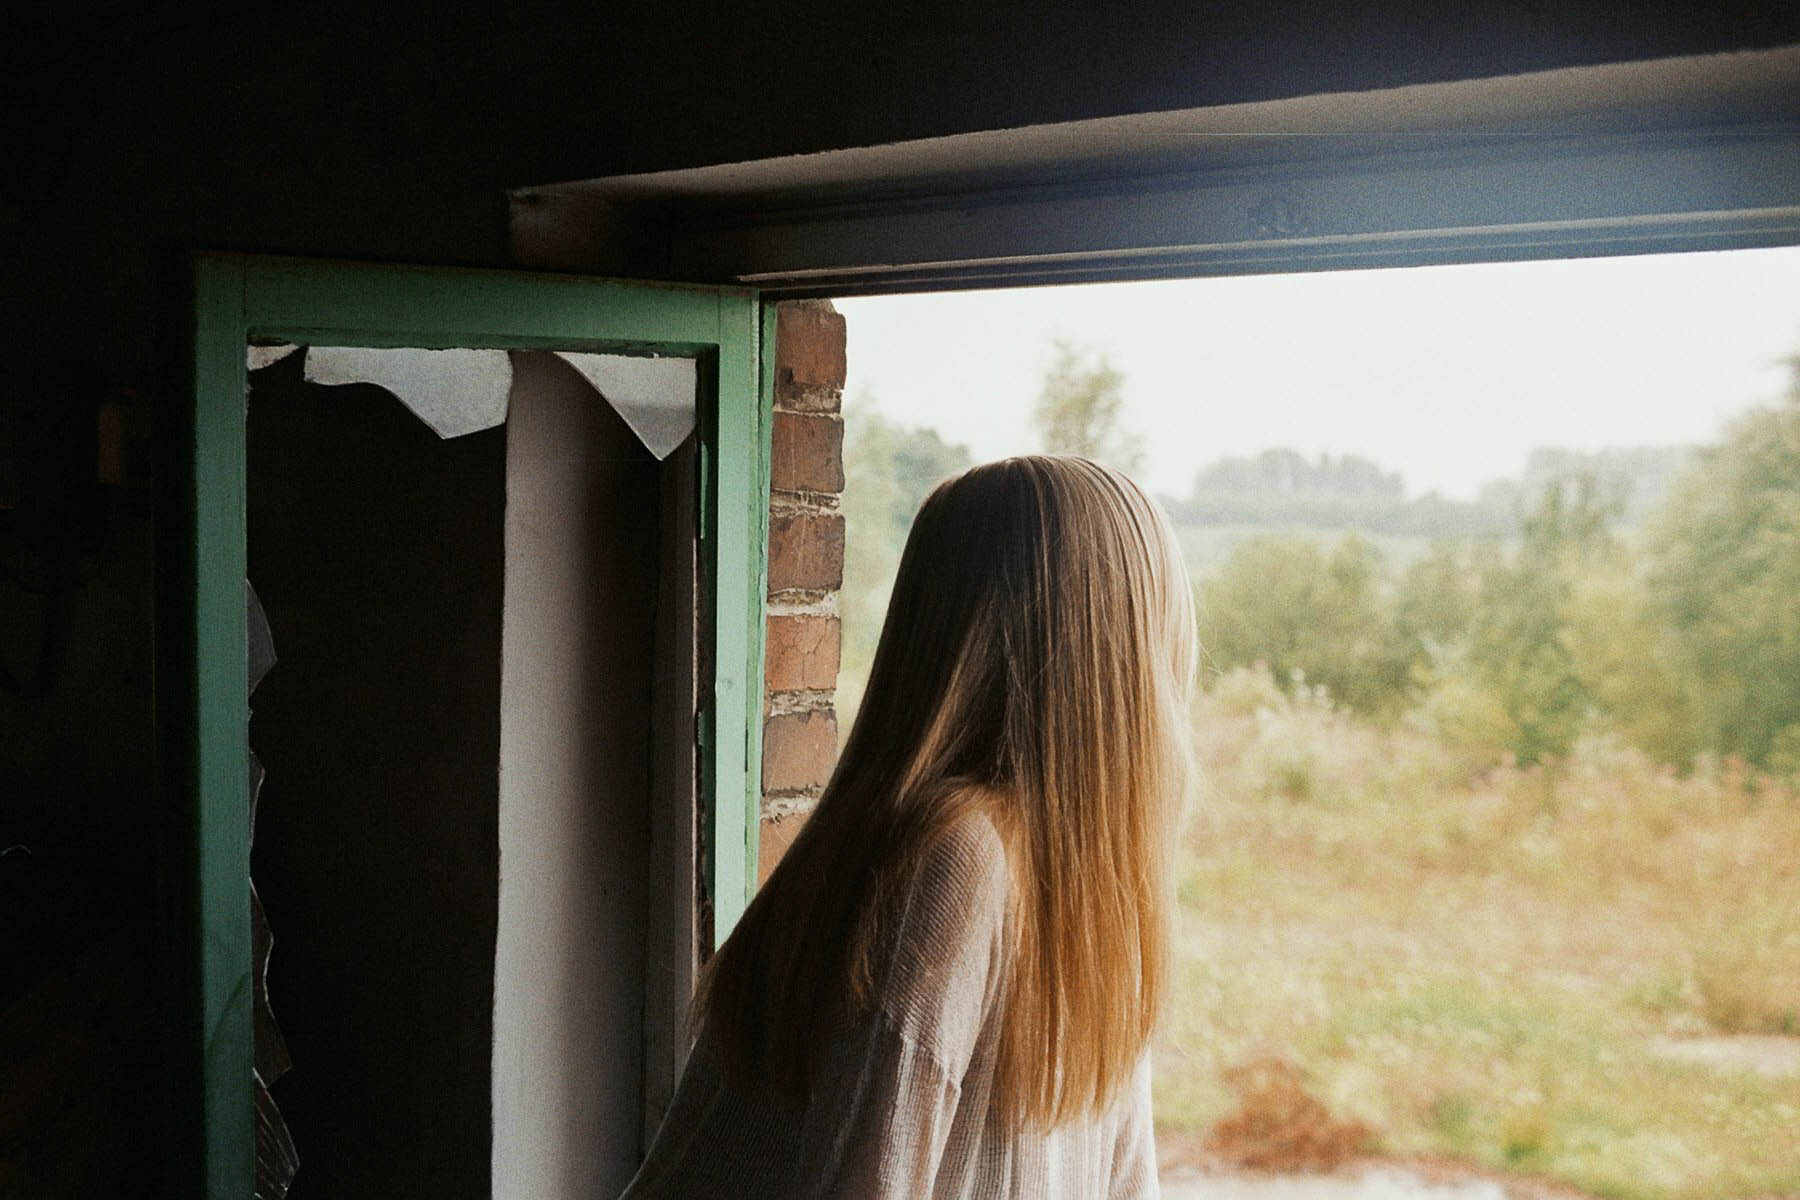 Wallpaper, sunlight, window, nature, abandoned, sky, photography, house, green, glass, alone, hair, standing, Nikon, broken, tree, girl, analog, photograph, filmisnotdead, you, if, leave, ifyouleave 1800x1200